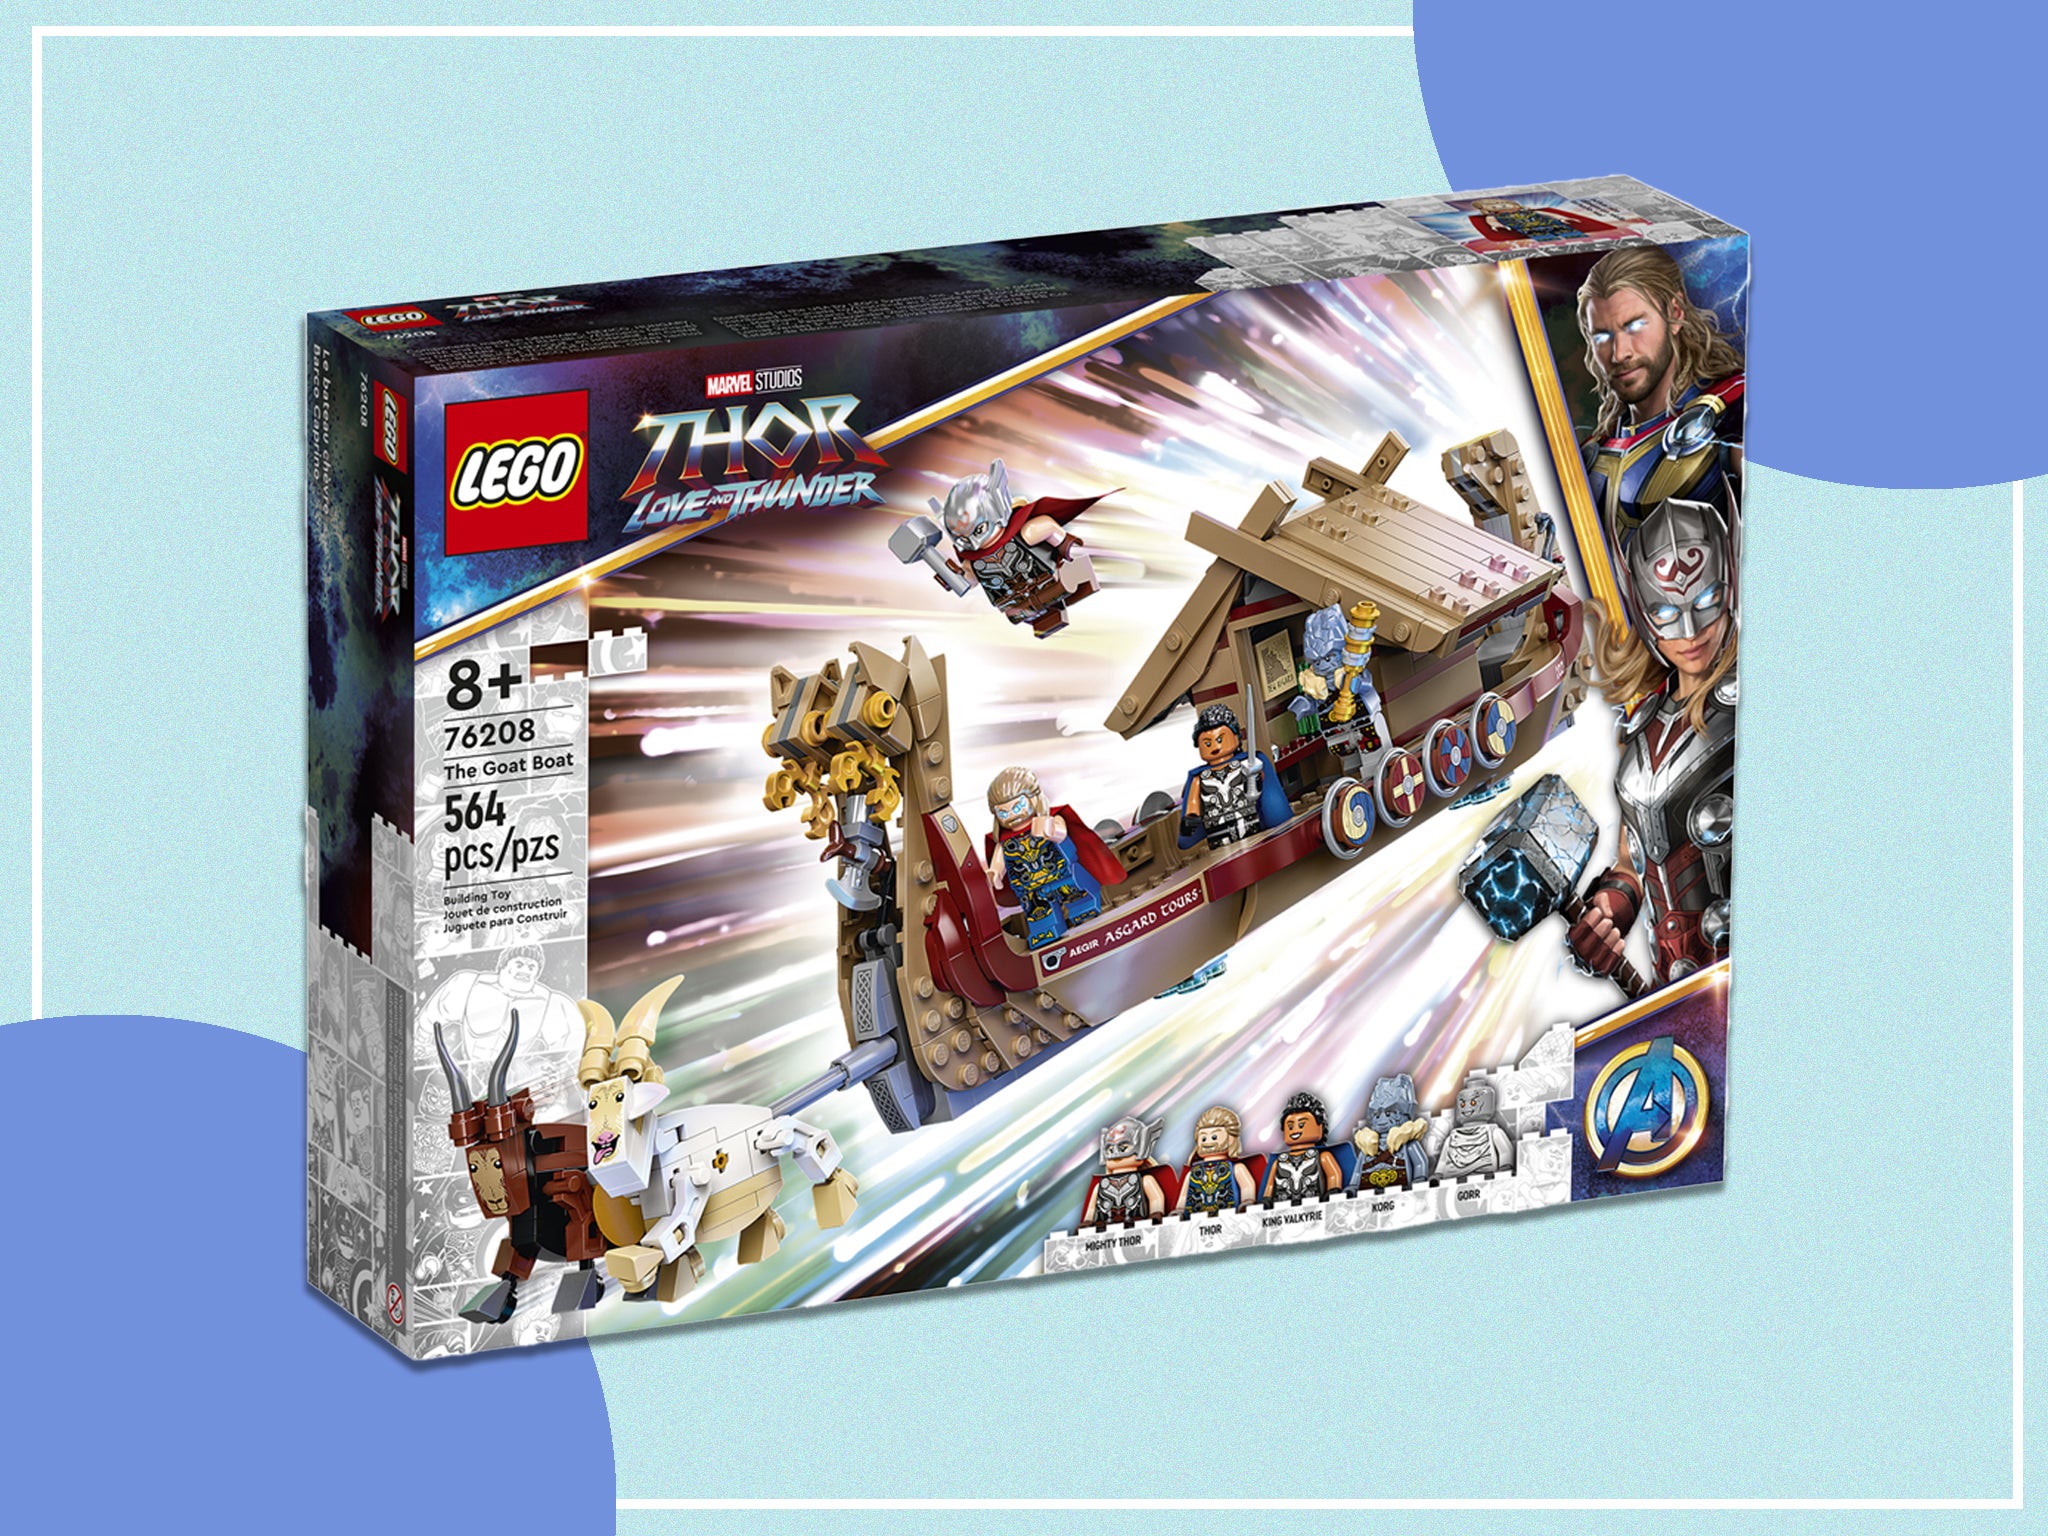 With more than 500 pieces, this is a Marvel-lover’s dream